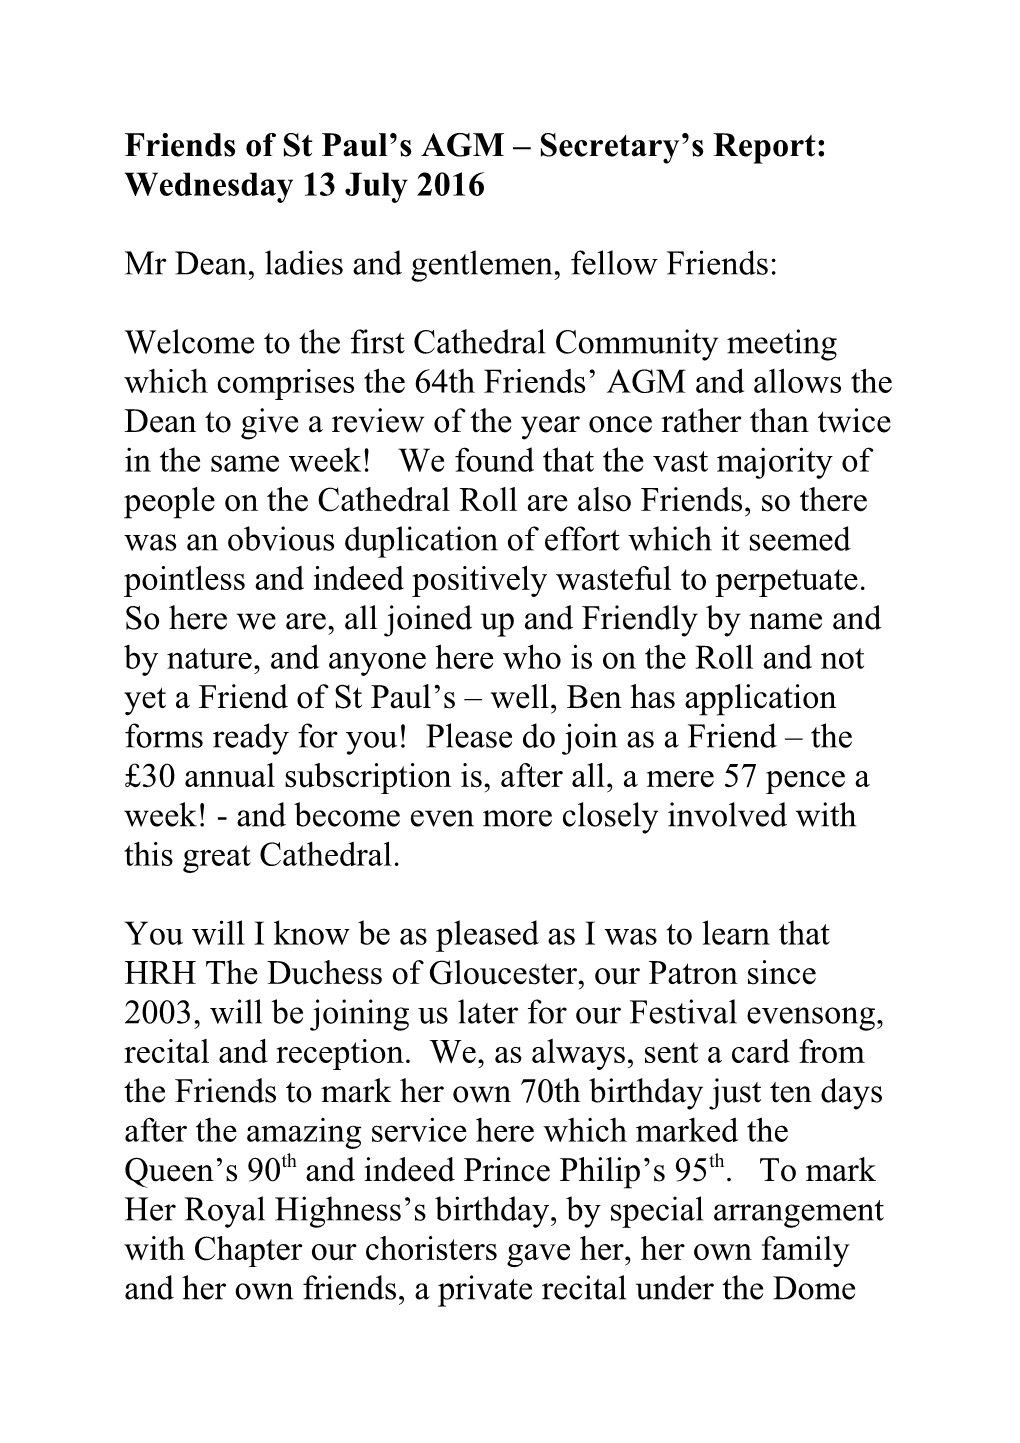 Friends of St Paul S AGM Secretary S Report: Wednesday 13 July 2016